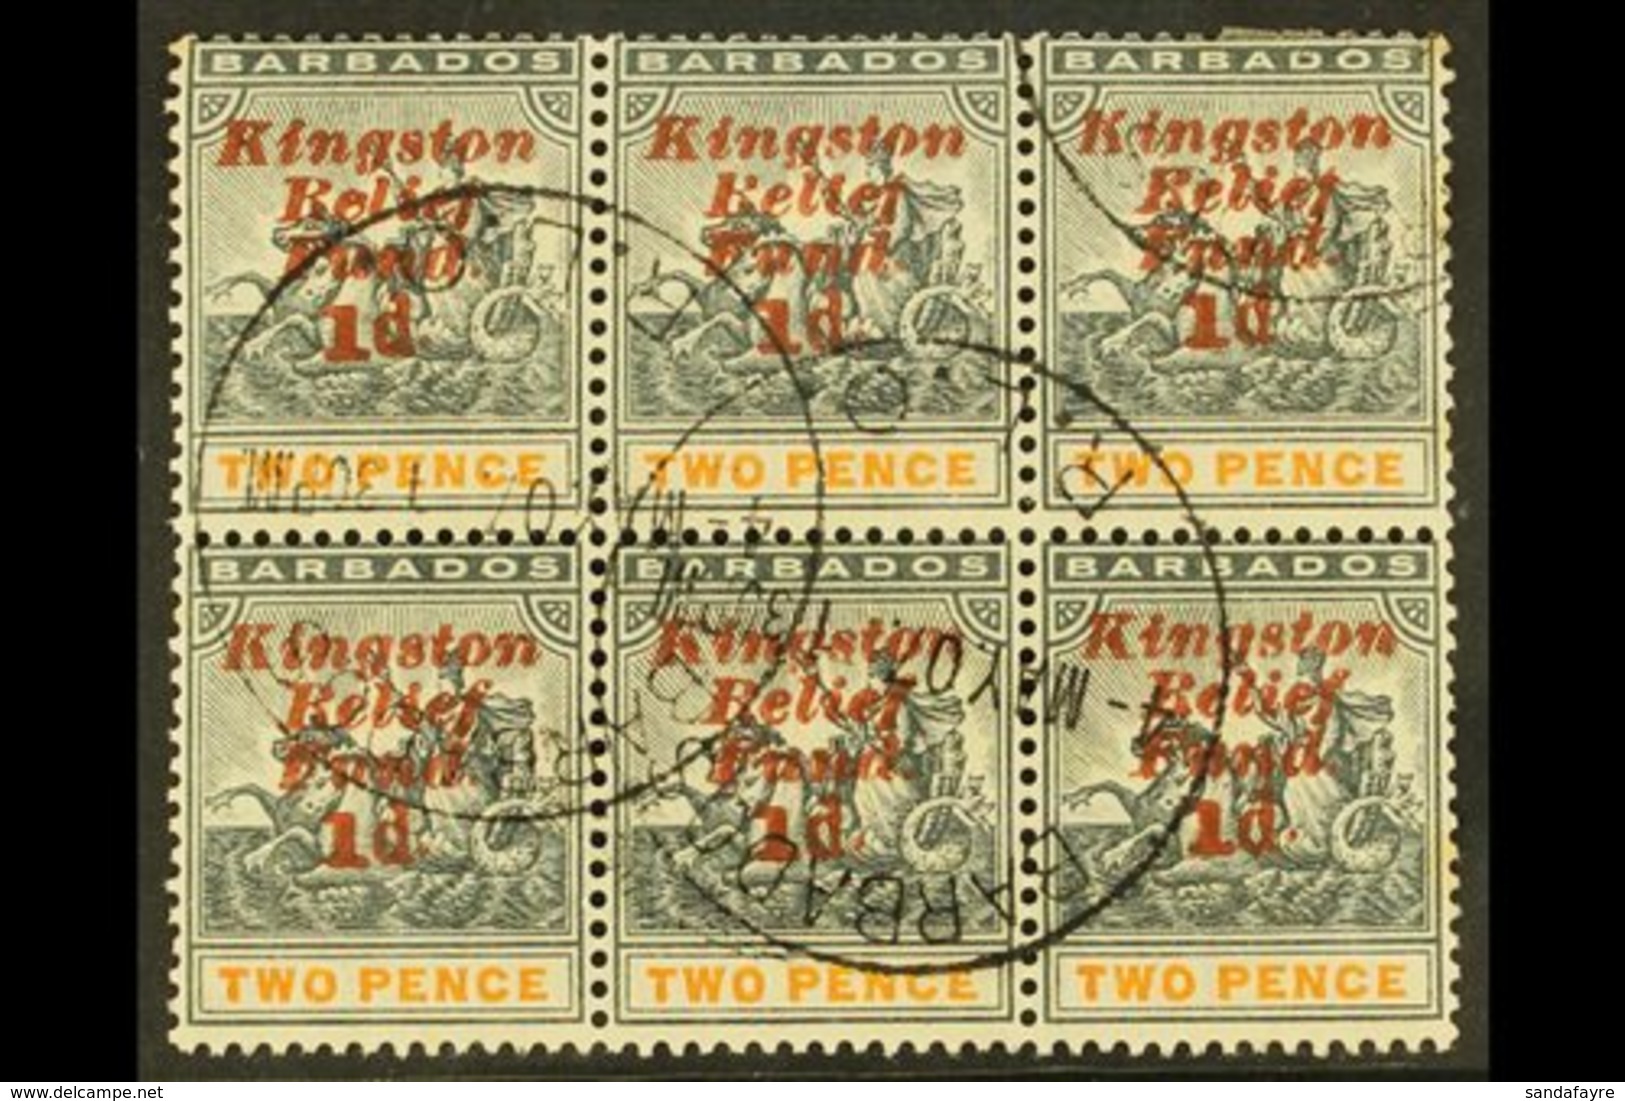 1907 KINGSTON RELIEF FUND (Eighth Setting) Upright Overprint 1d On 2d, SG 153, Fine Used BLOCK OF SIX (3 X 2) Including  - Barbades (...-1966)